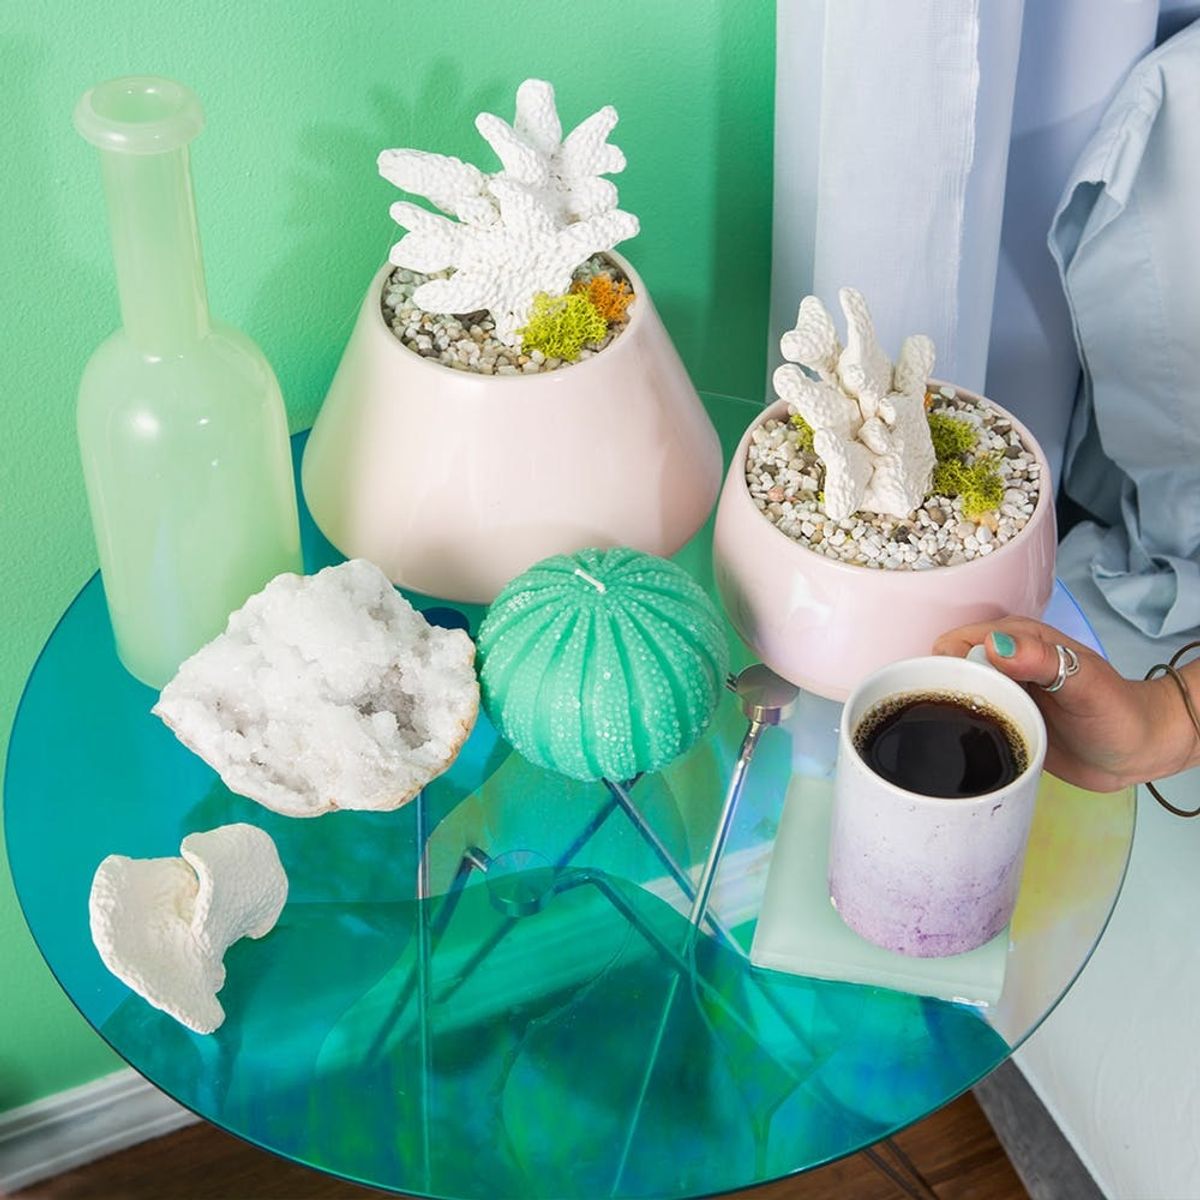 Go Under the Sea With This Mermaid-Inspired Side Table DIY